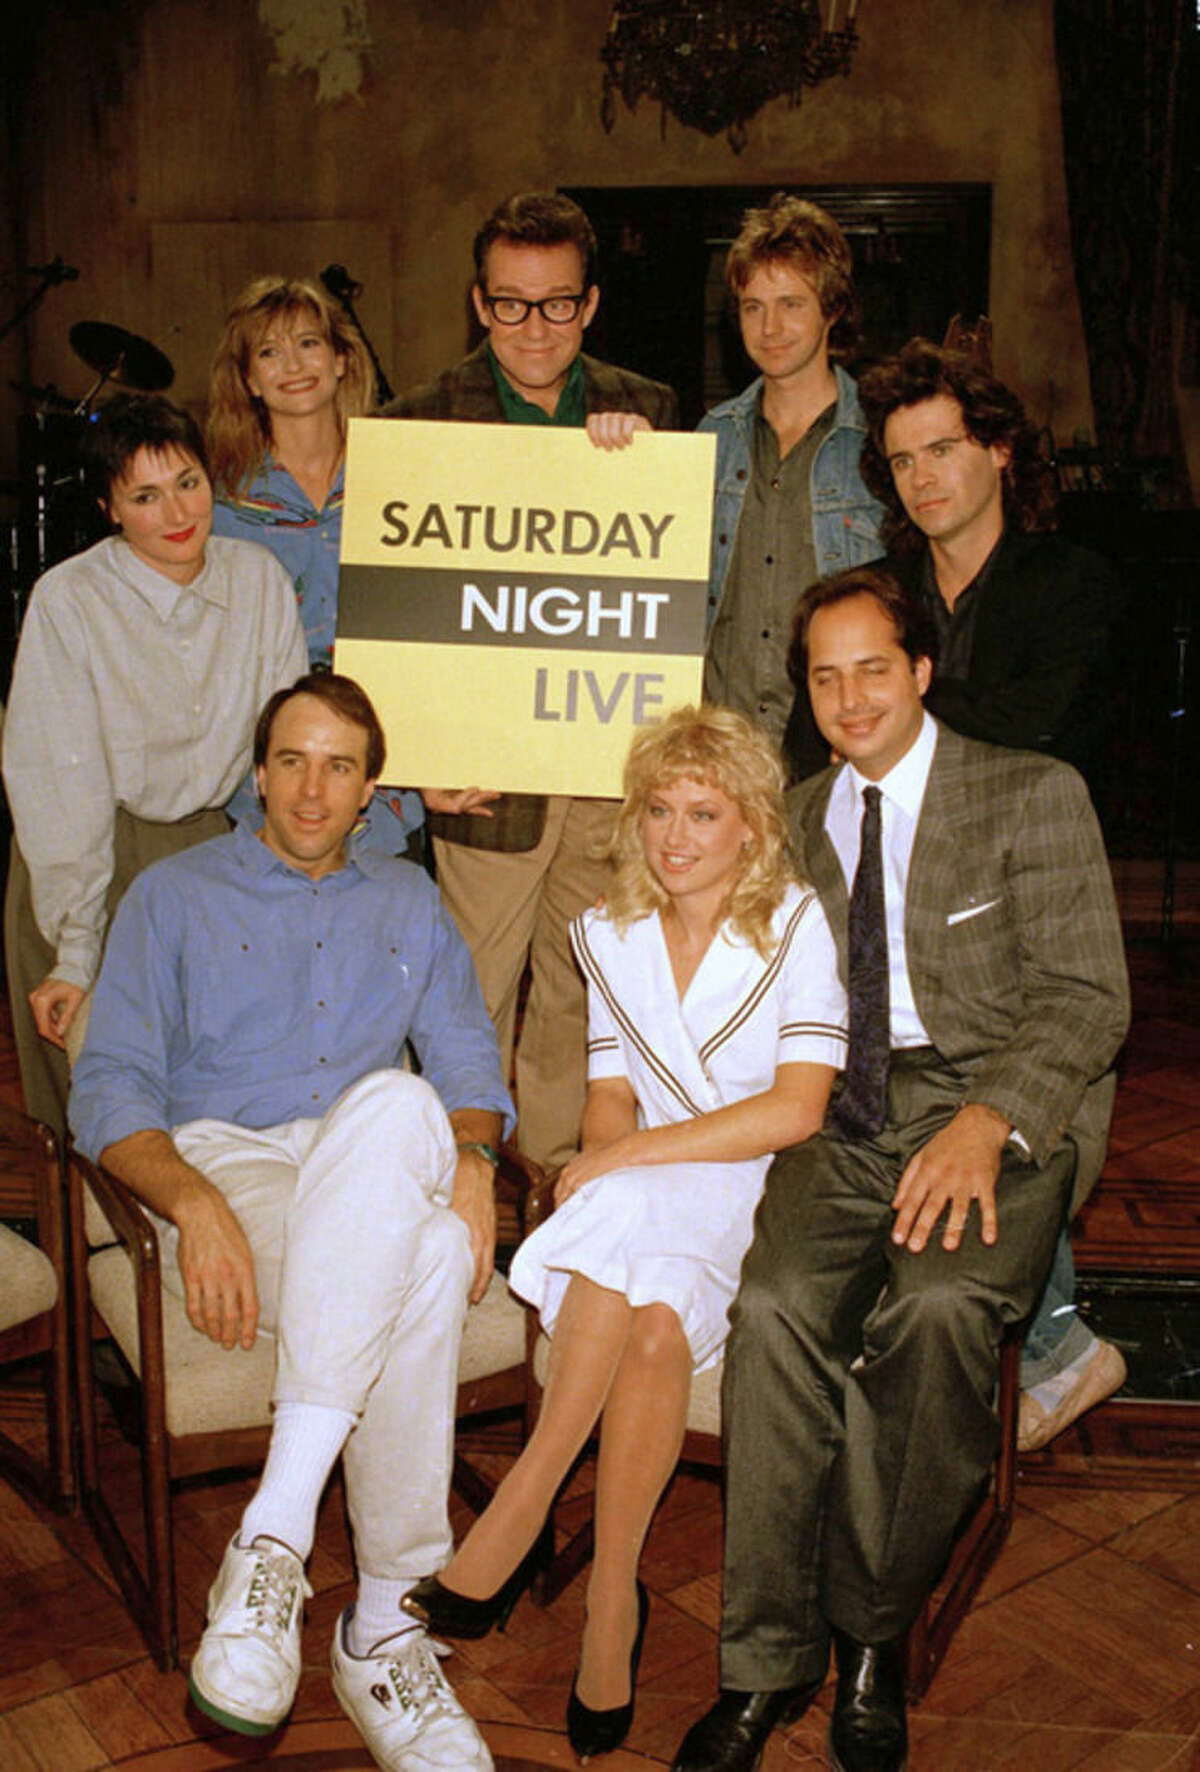 FILE - In this Dec. 9, 1986 file photo, the cast of NBC's "Saturday Night Live," clockwise, from left, Nora Dunn, Jan Hooks, Phil Hartman, Dana Carvey, Dennis Miller, Jon Lovitz, Victoria Jackson, and Kevin Nealon, pose together, in New York. Hooks, the former "Saturday Night Live" cast member has died. She was 57. Hooks died Thursday, Oct. 9, 2014 according to her agent Lisa Lieberman. (AP Photo/Richard Drew, file)